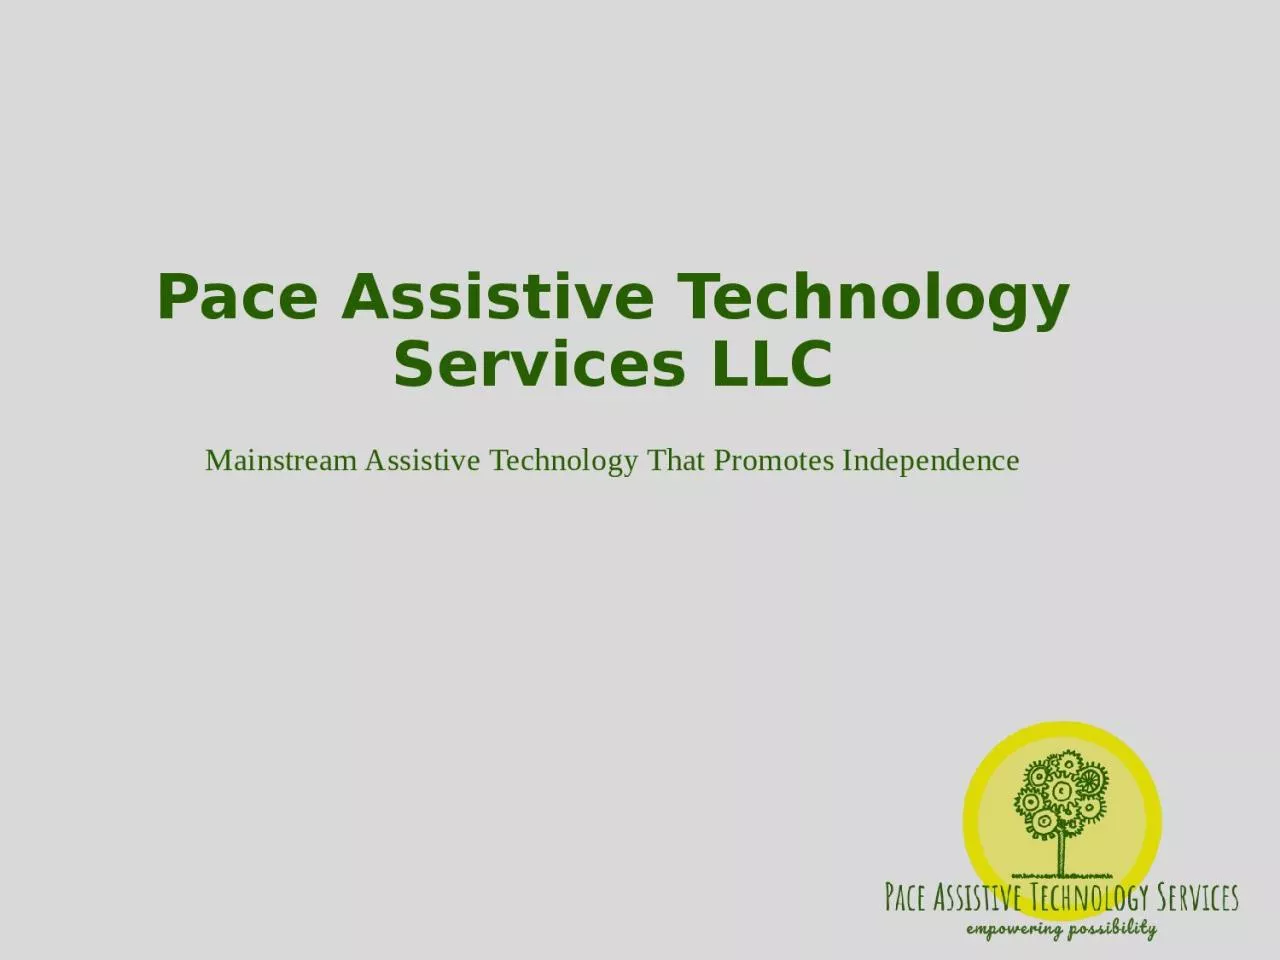 Pace Assistive Technology Services LLC